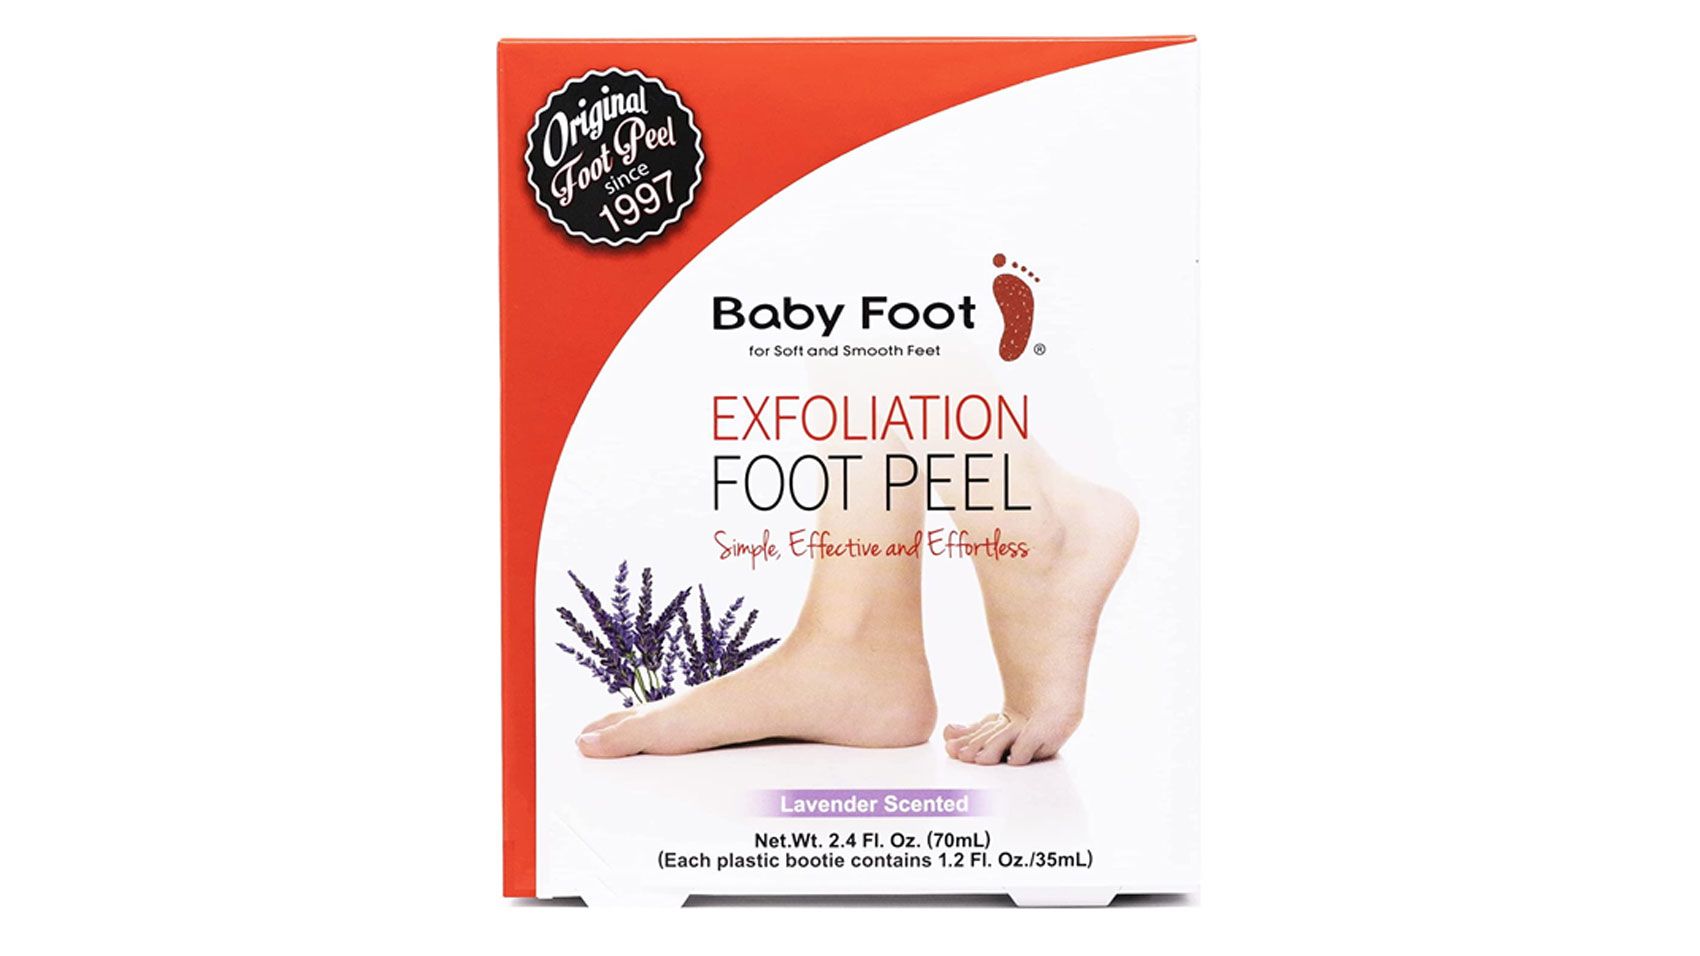 Why Didn't Baby Foot Work for Me?